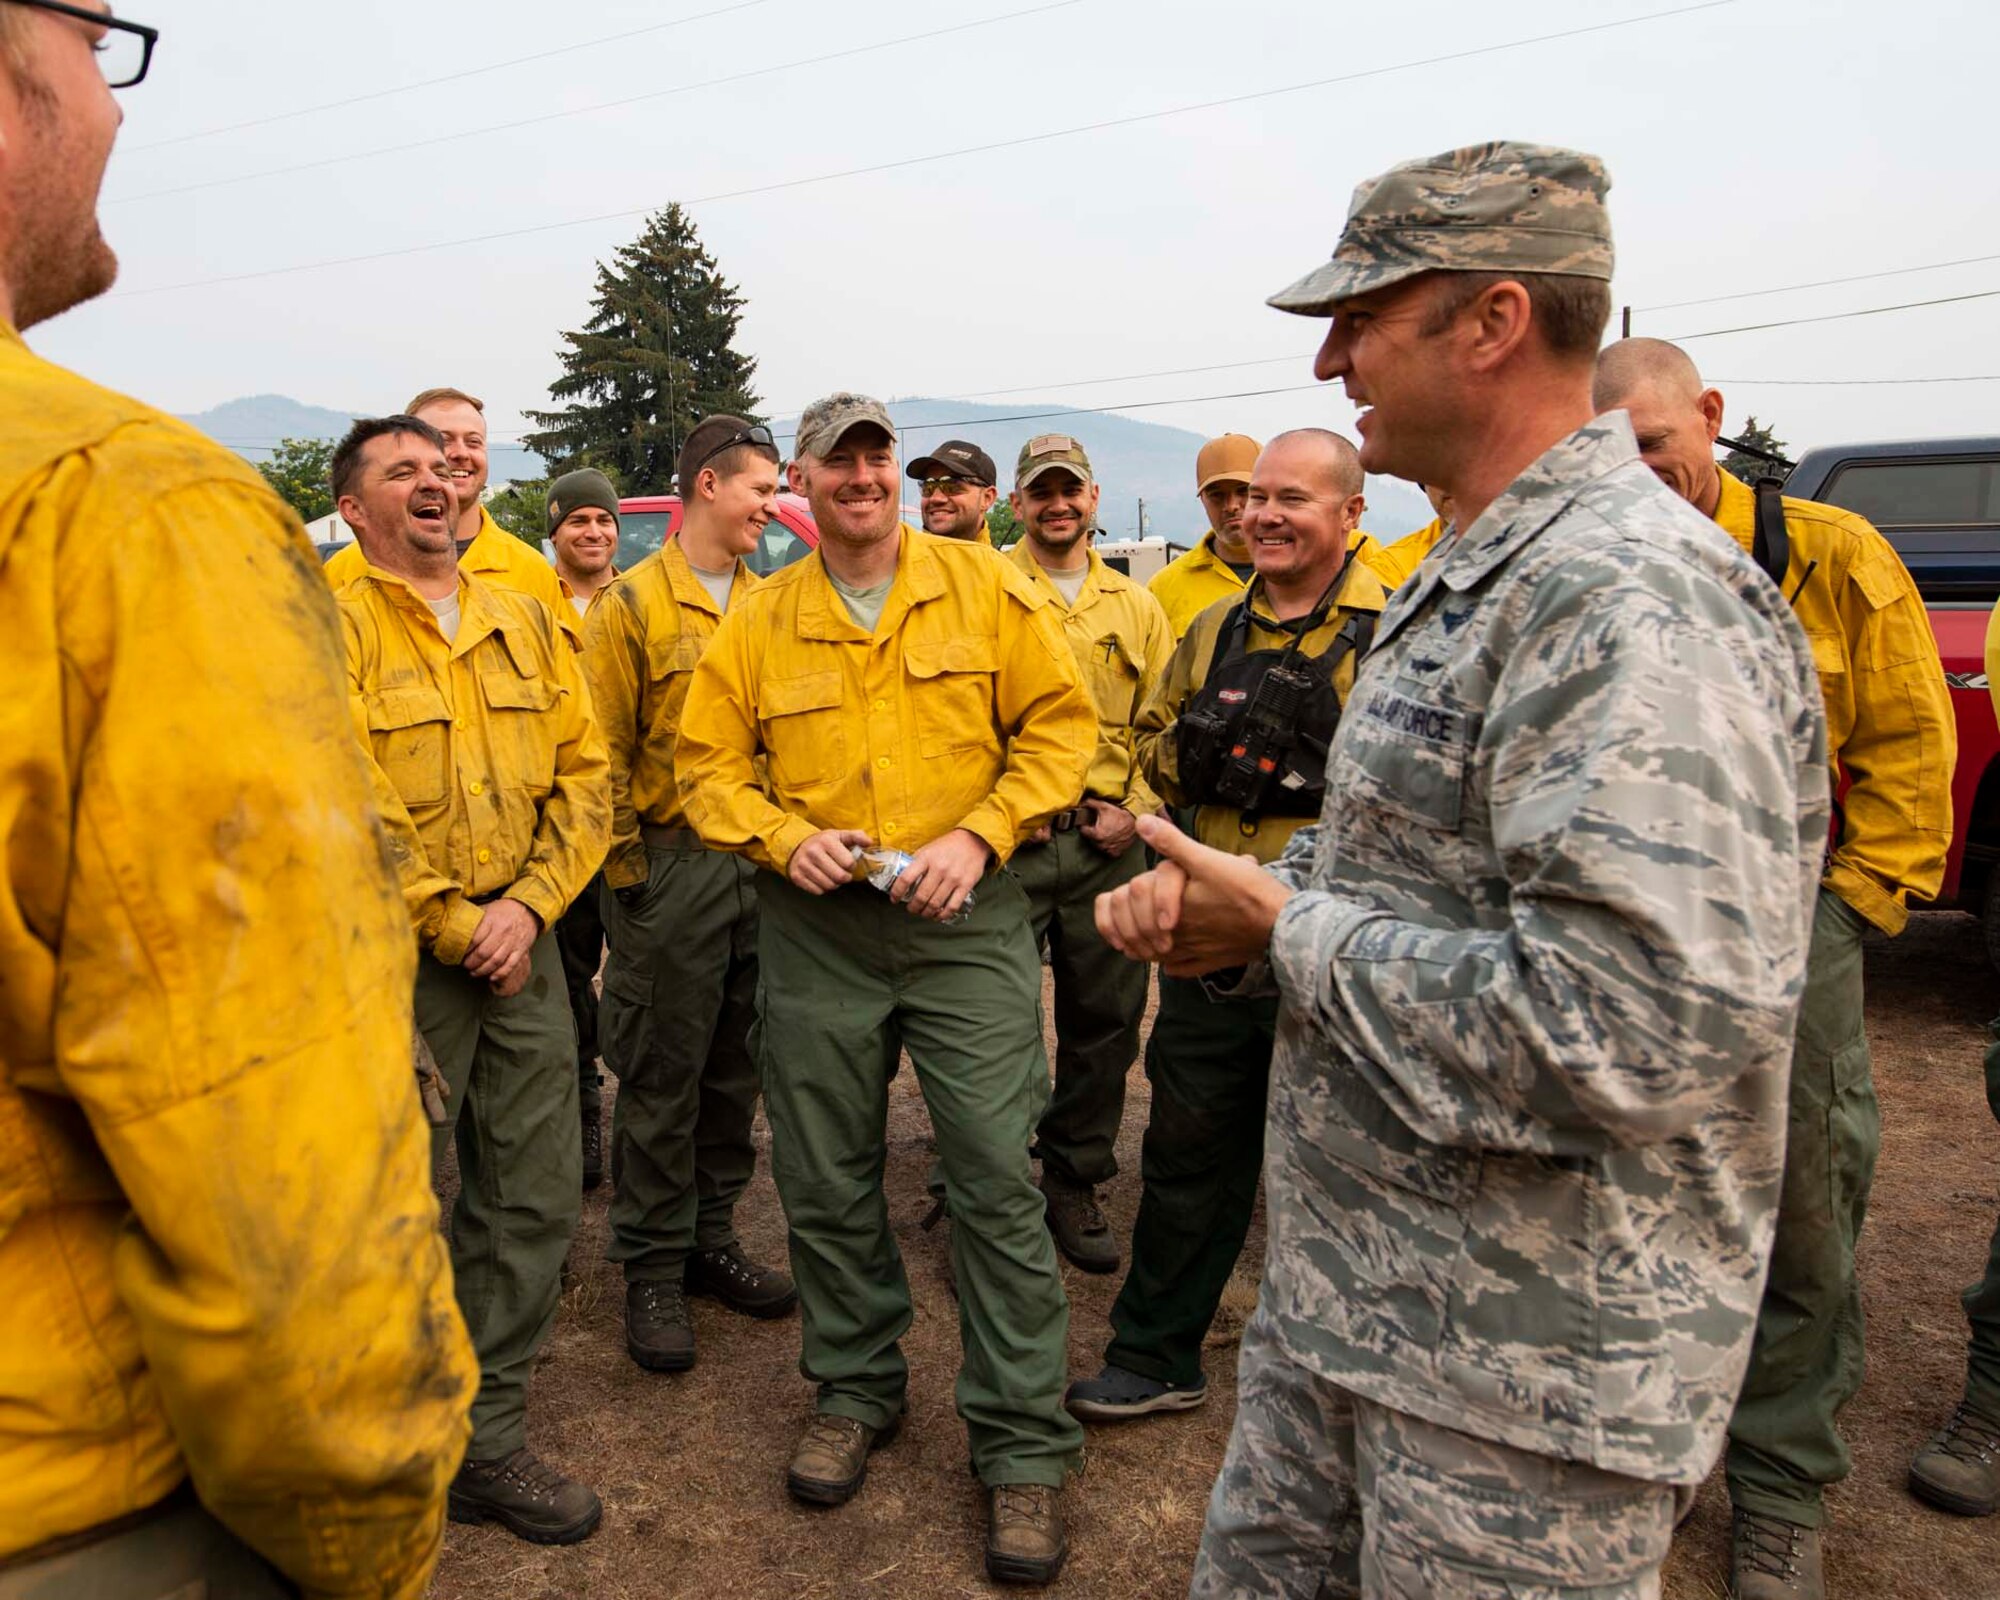 Col. Johan Deutscher, commander of the 141st Air Refueling Wing, greets guardsmen from the 141st who mobilized to Northport, Wash. to support firefighting efforts for the Sheep Creek fire August 8, 2018. Nearly 60 Guardsmen from the 141st ARW were mobilized to help support firefighting efforts throughout the region. (U.S. Air National Guard photo by Staff Sgt. Rose M. Lust)